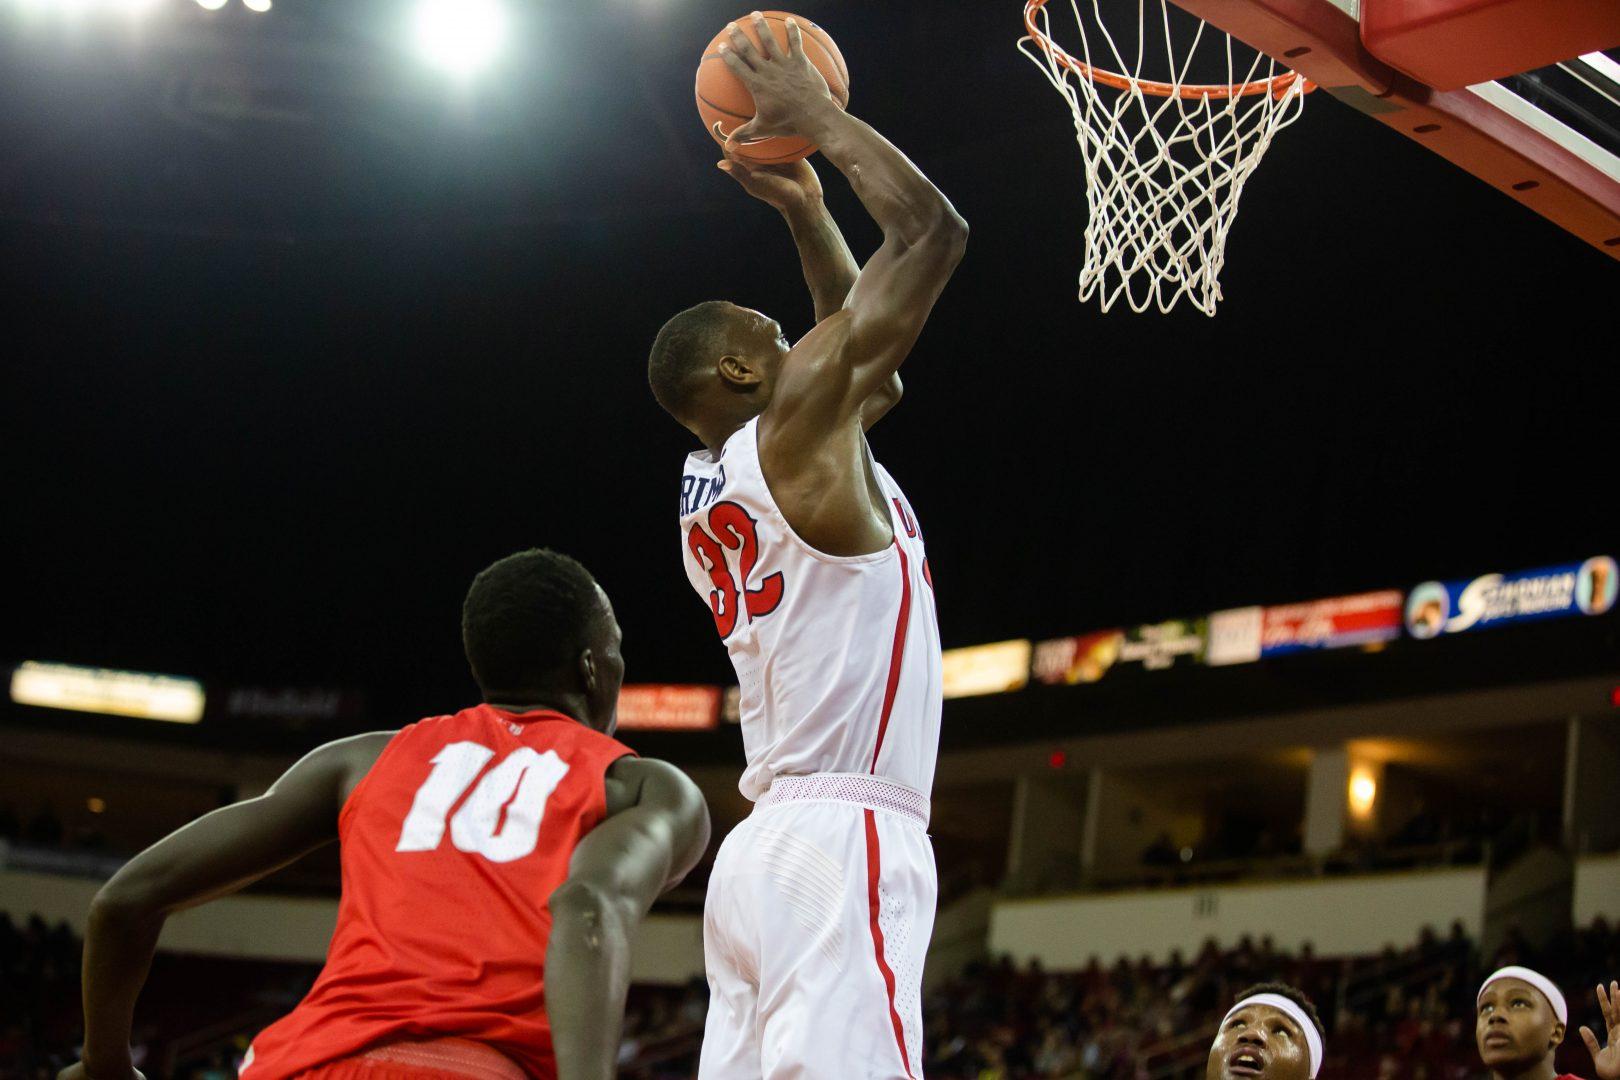 Fresno State forward Nate Grimes goes up for a shot during the Bulldogs’ home win
over New Mexico at the Save Mart Center on Feb. 2, 2019. (Jose Romo Jr./The Collegian).